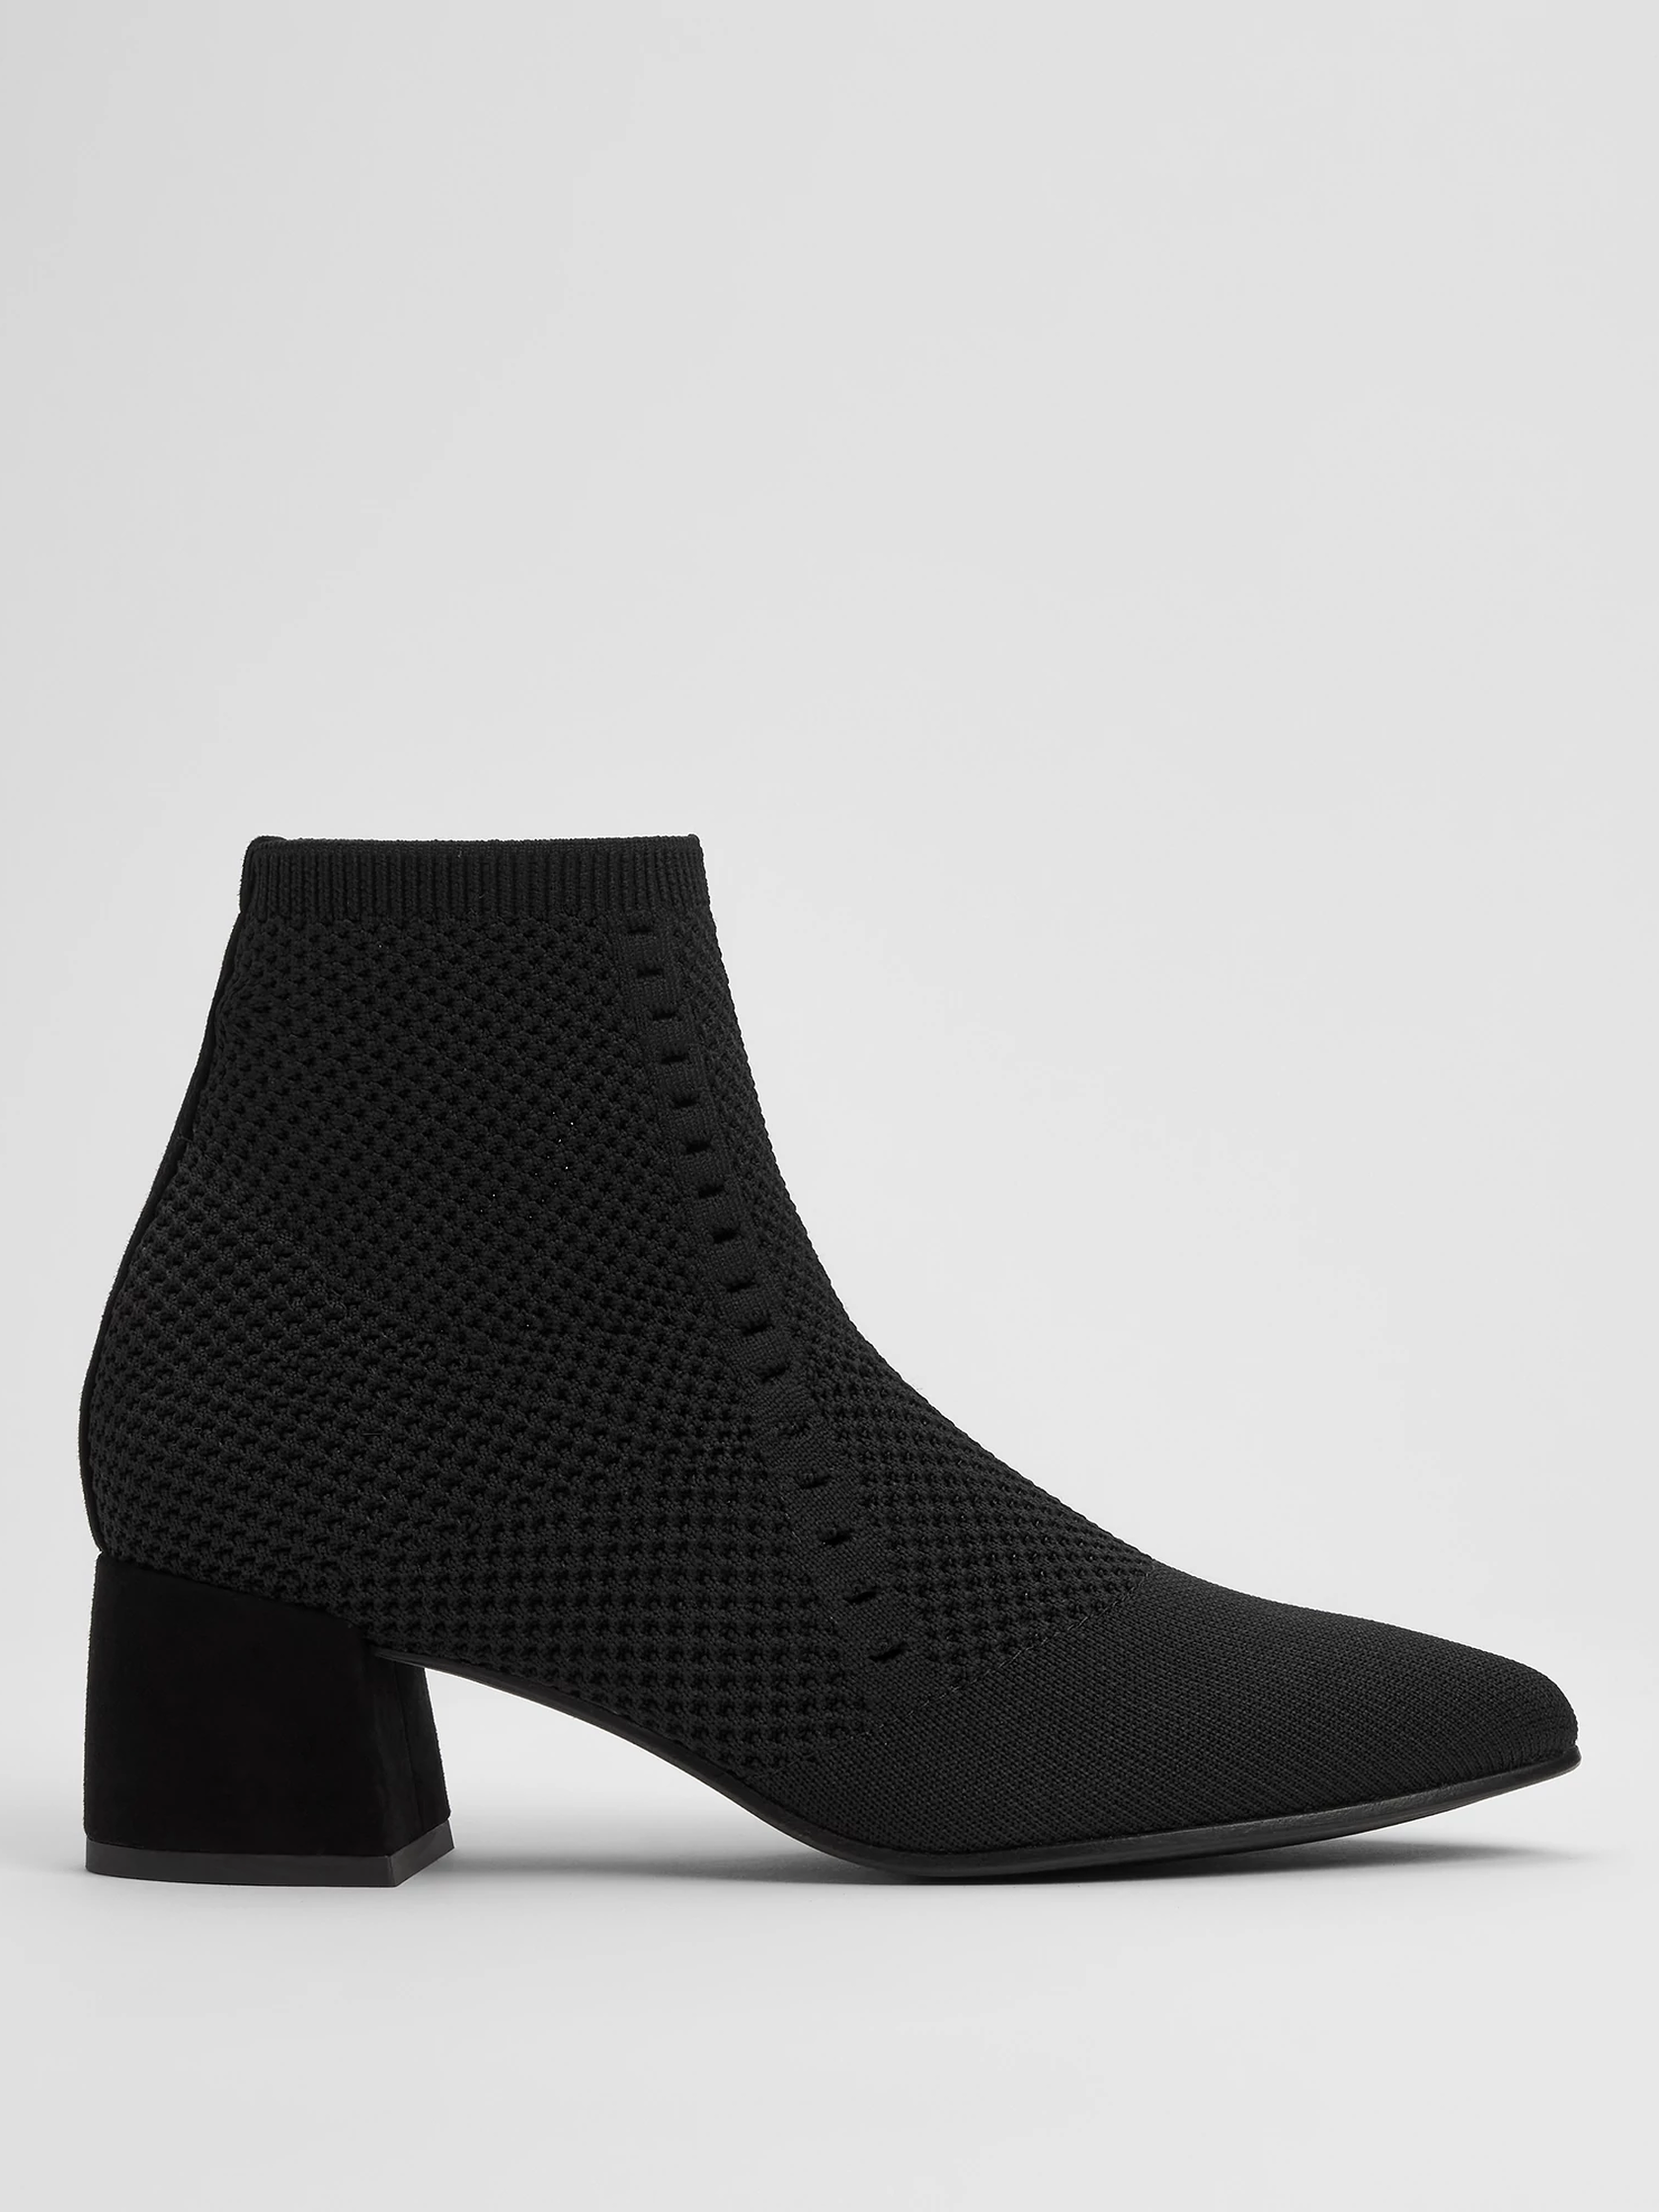 Honey Recycled Stretch Knit Bootie